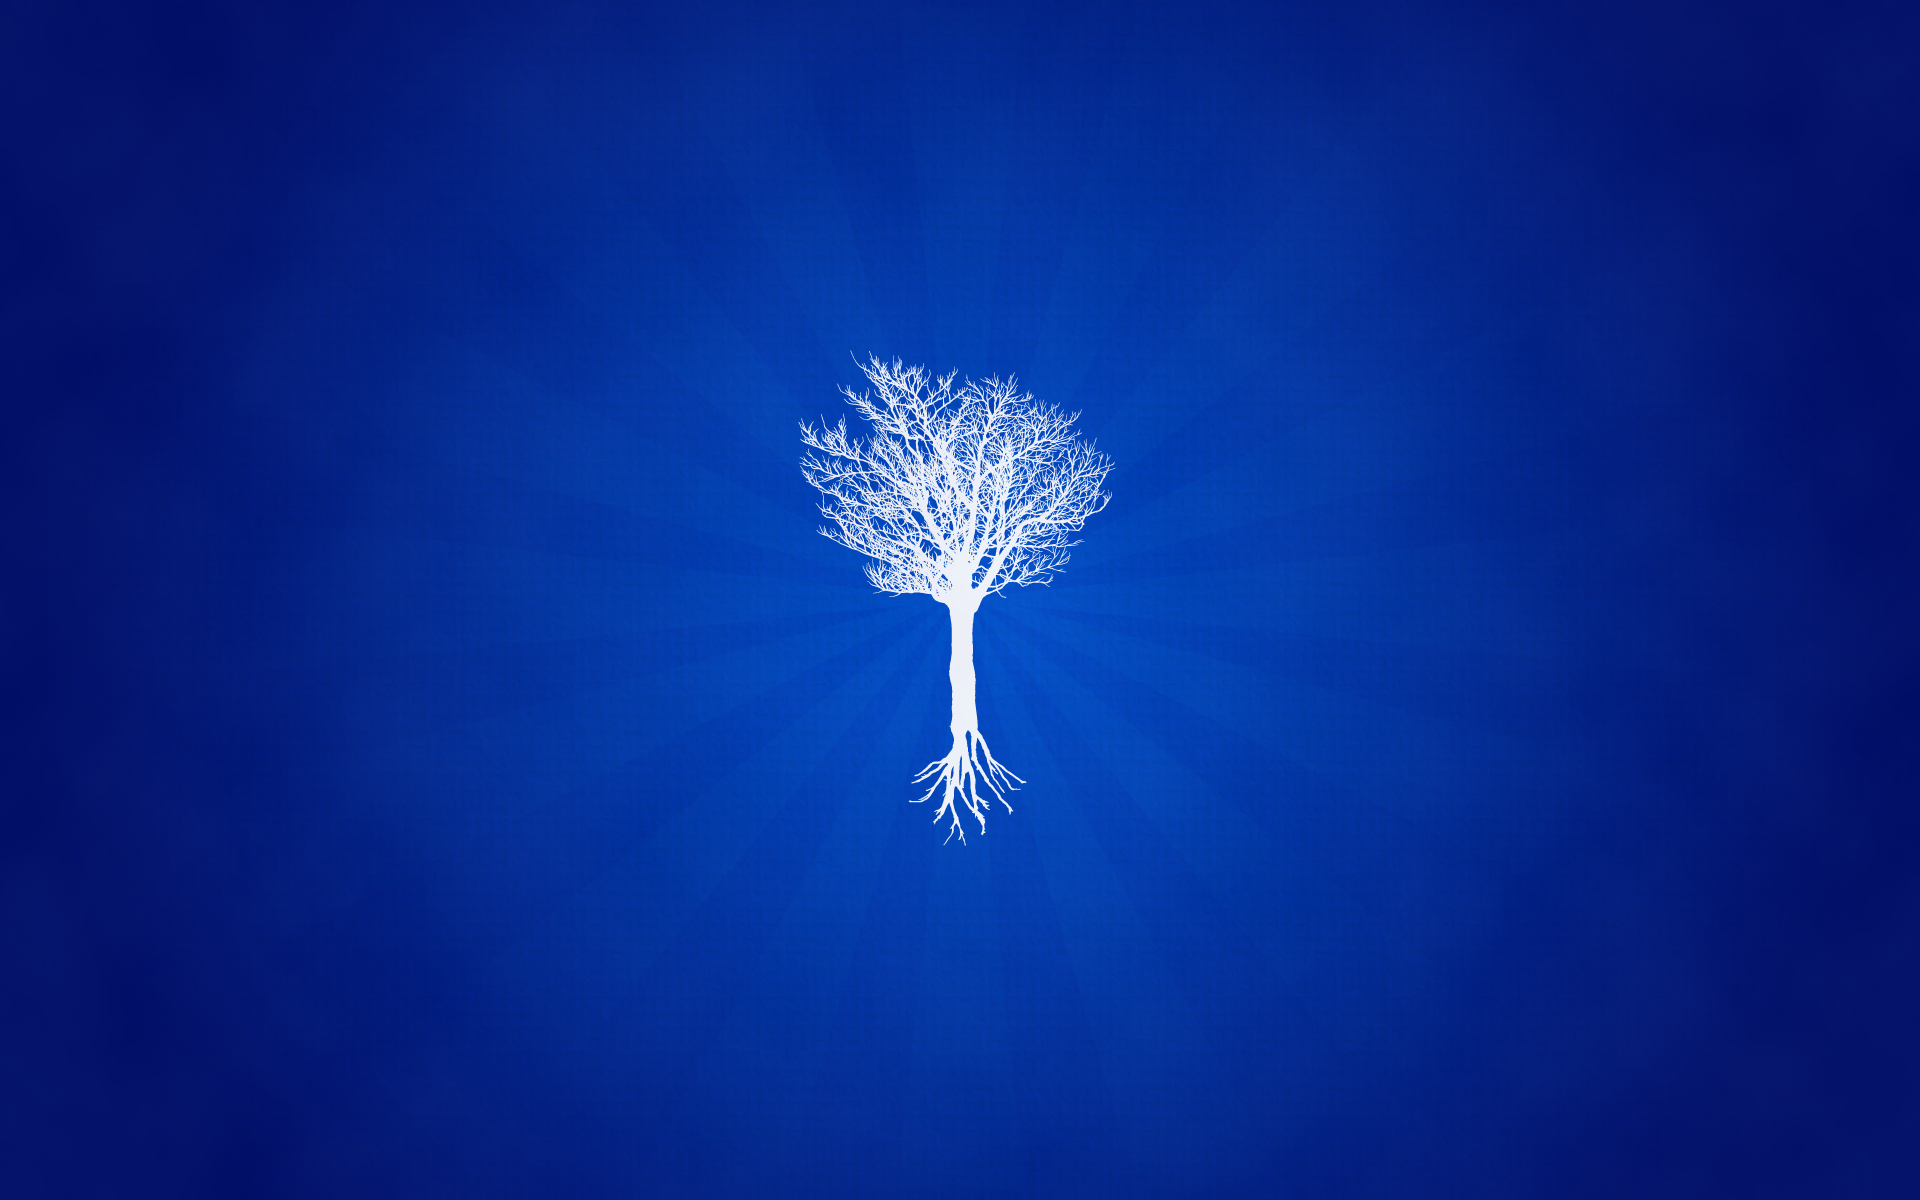 Click To The Floating Tree Wallpaper In